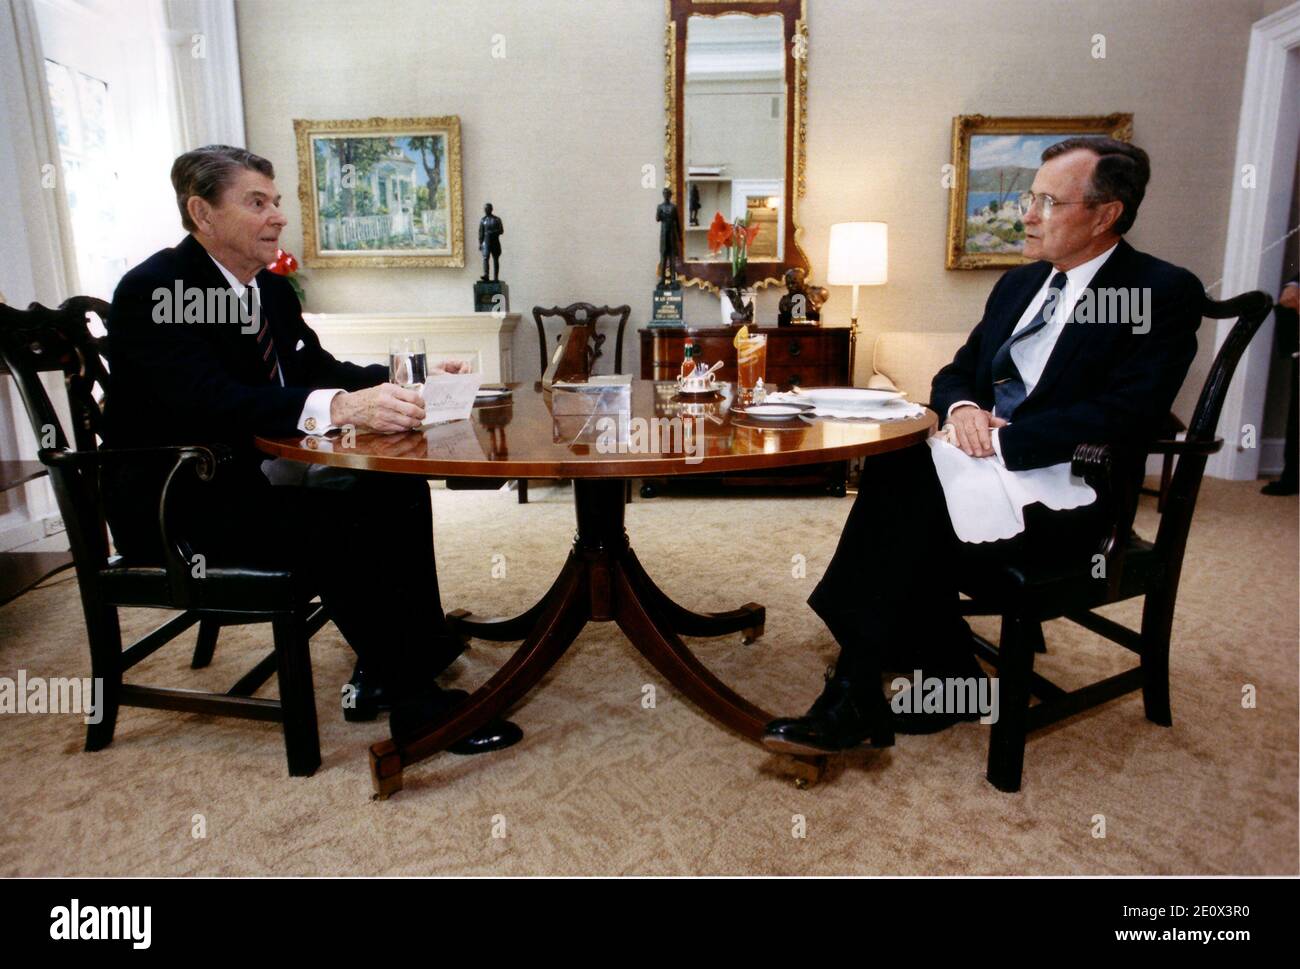 Washington, D.C. - April 27, 1988 -- United States President Ronald Reagan and Vice President George H.W. Bush meet for their weekly lunch in the Oval Office Study at the White House in Washington, DC on April 27, 1988. Photo by White House/CNP/ABACAPRESS.COM Stock Photo